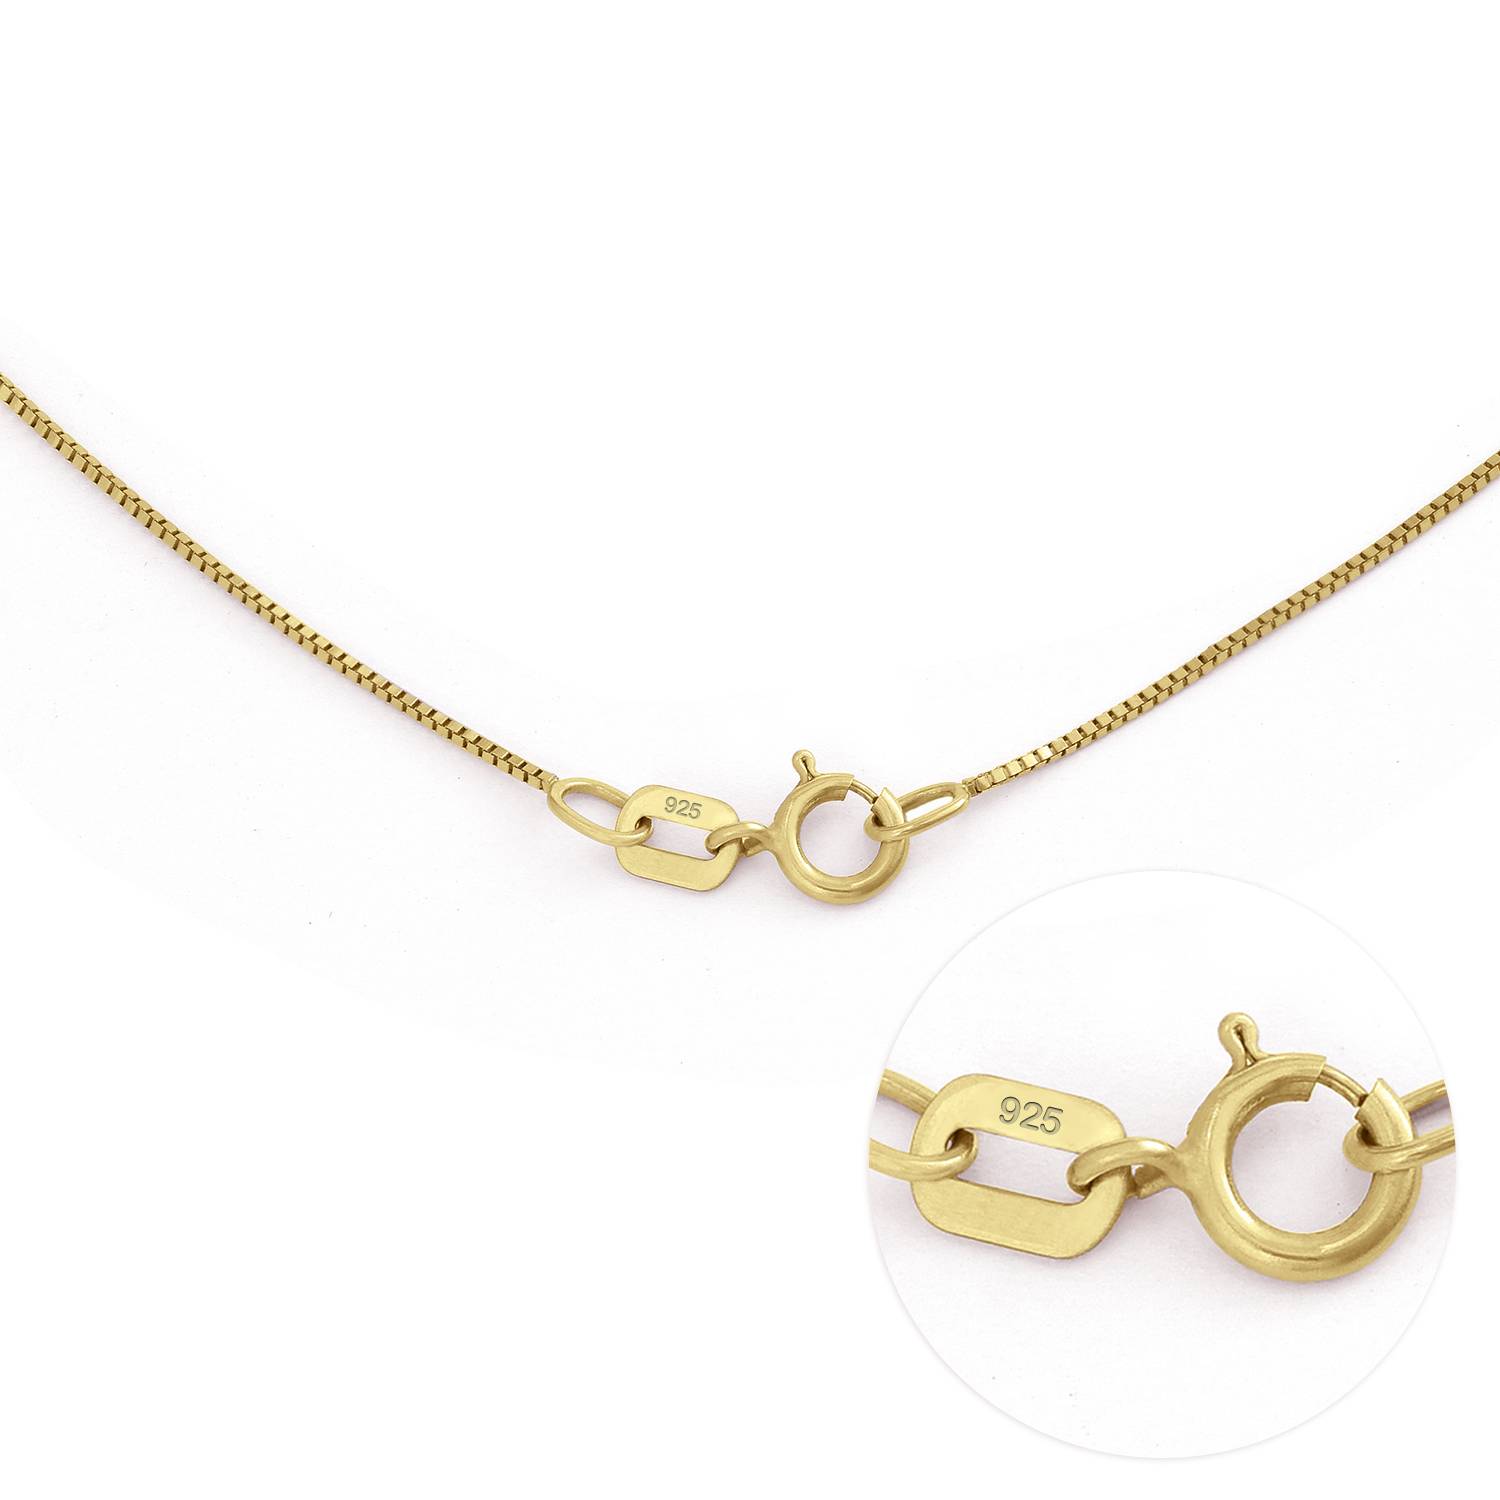 Two Hearts Forever One Necklace Gold Plated with Diamonds